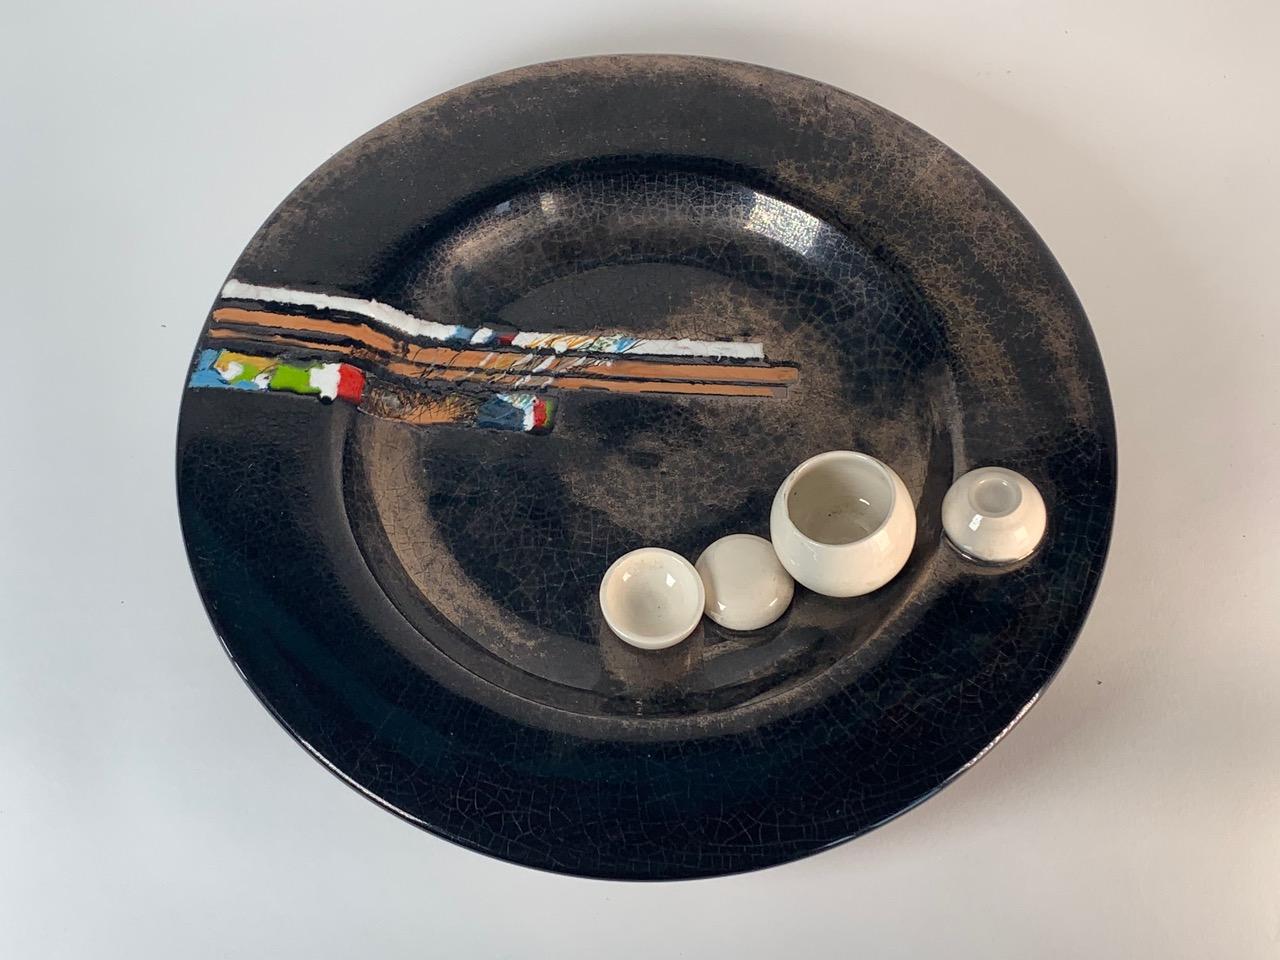 Polychrome ceramic plate designed by Carlo Carlè. Single piece. Signed.

Biography
The ceramist Carlos Carlé was born in Oncativo, Argentina, in 1928 and approached ceramics at his father's refractory factory. In 1938 he moved with his family to